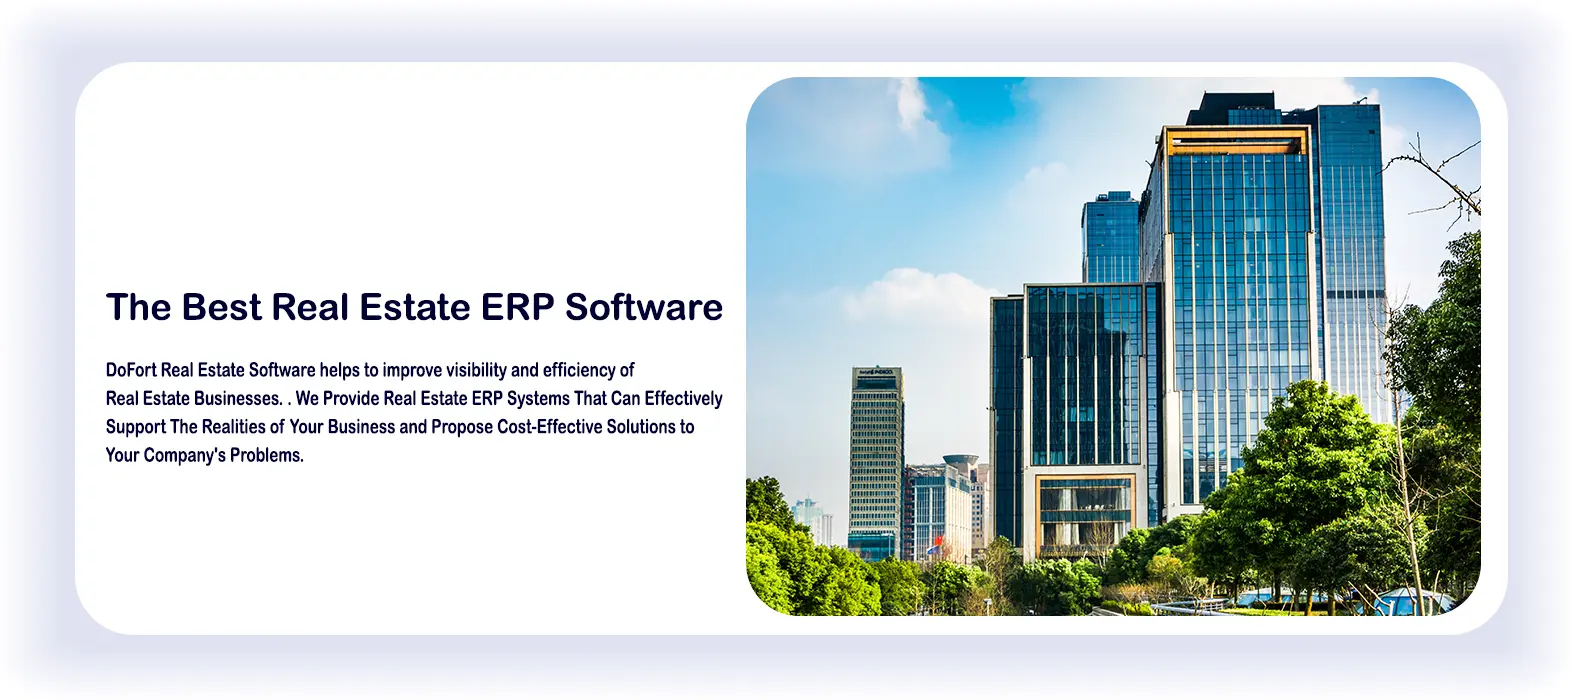 The Best Real Estate ERP Software